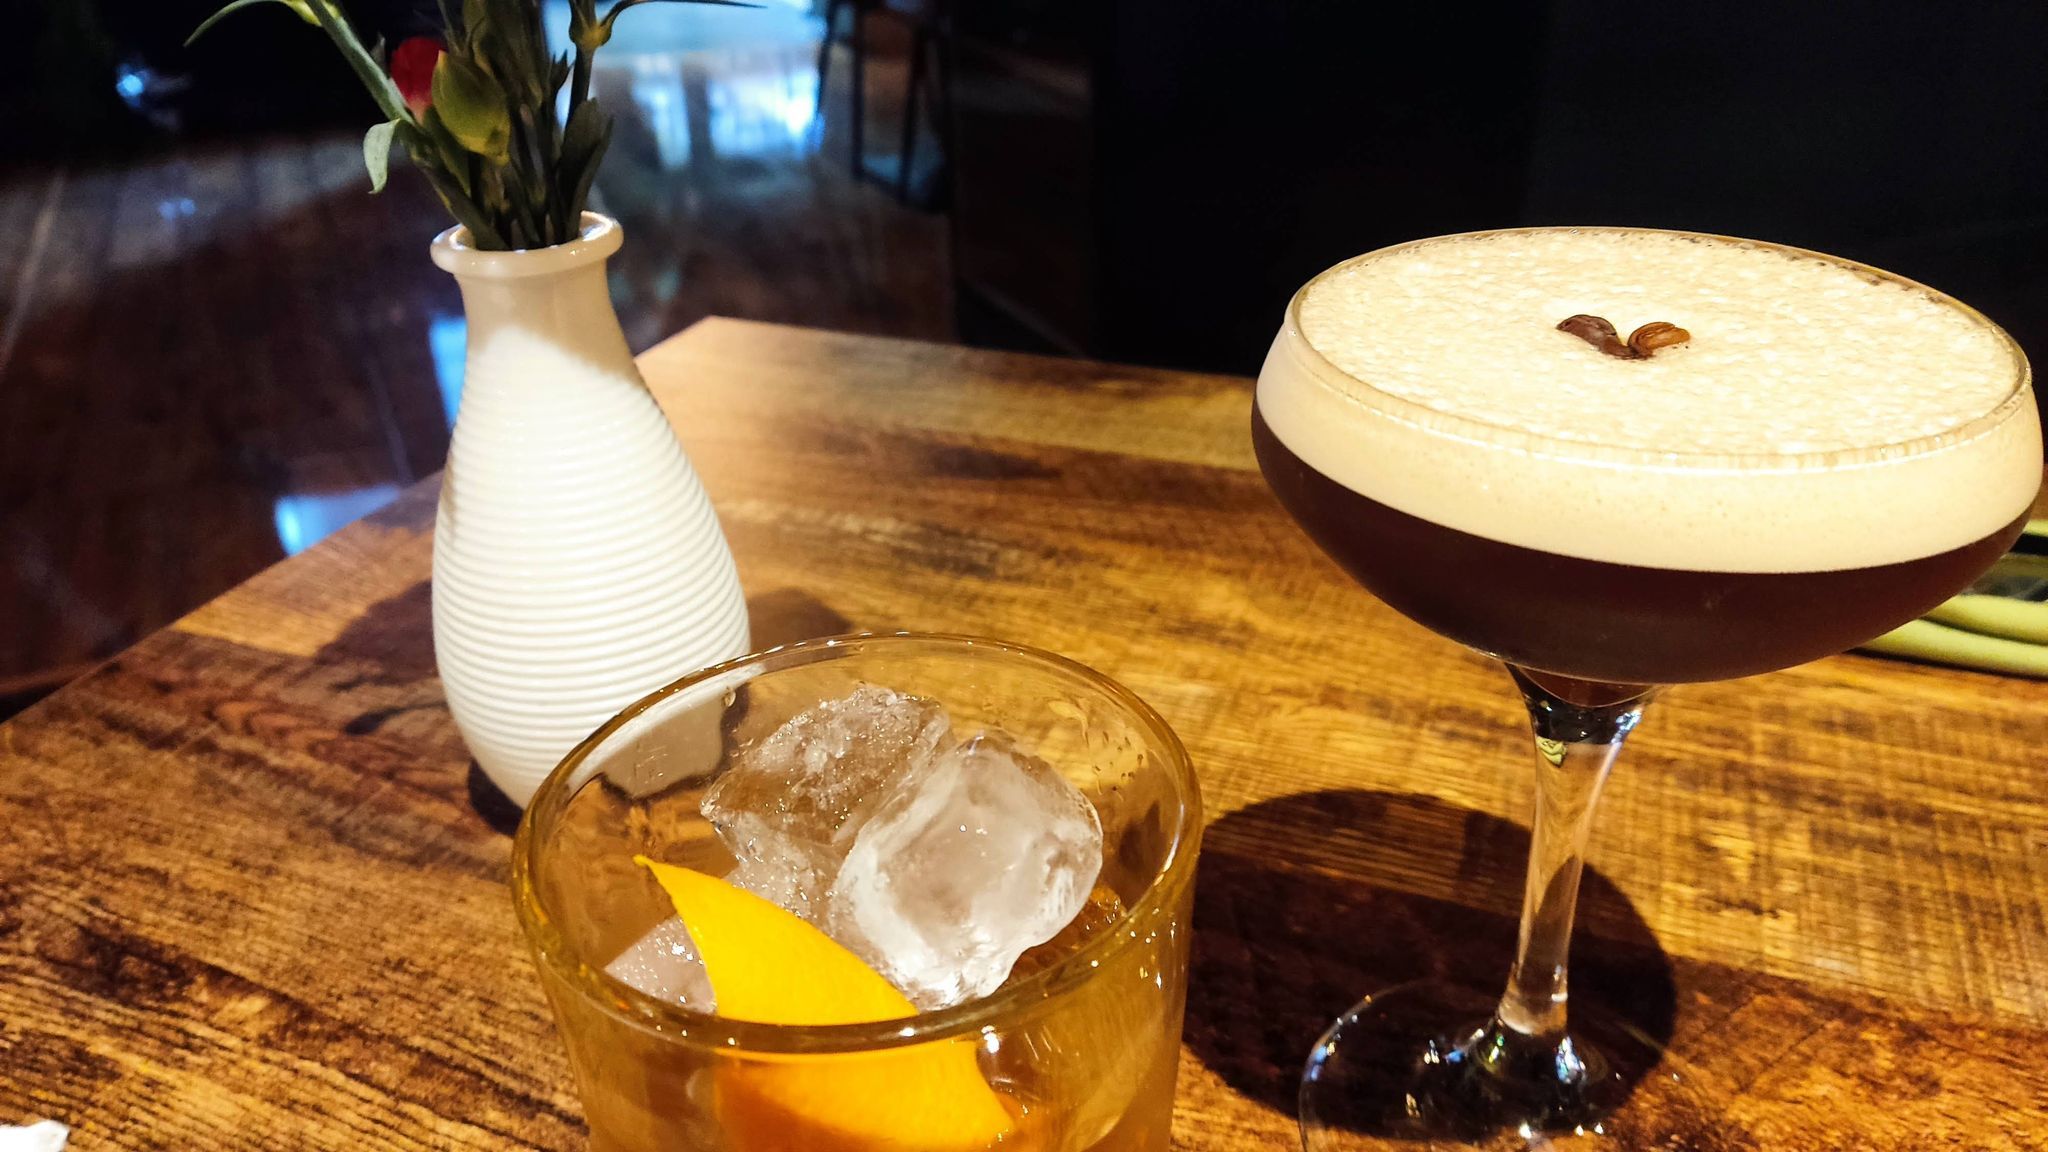 Espresso martini and a warming “Bourbon and Blood on the brown table of the new restaurant in Hove